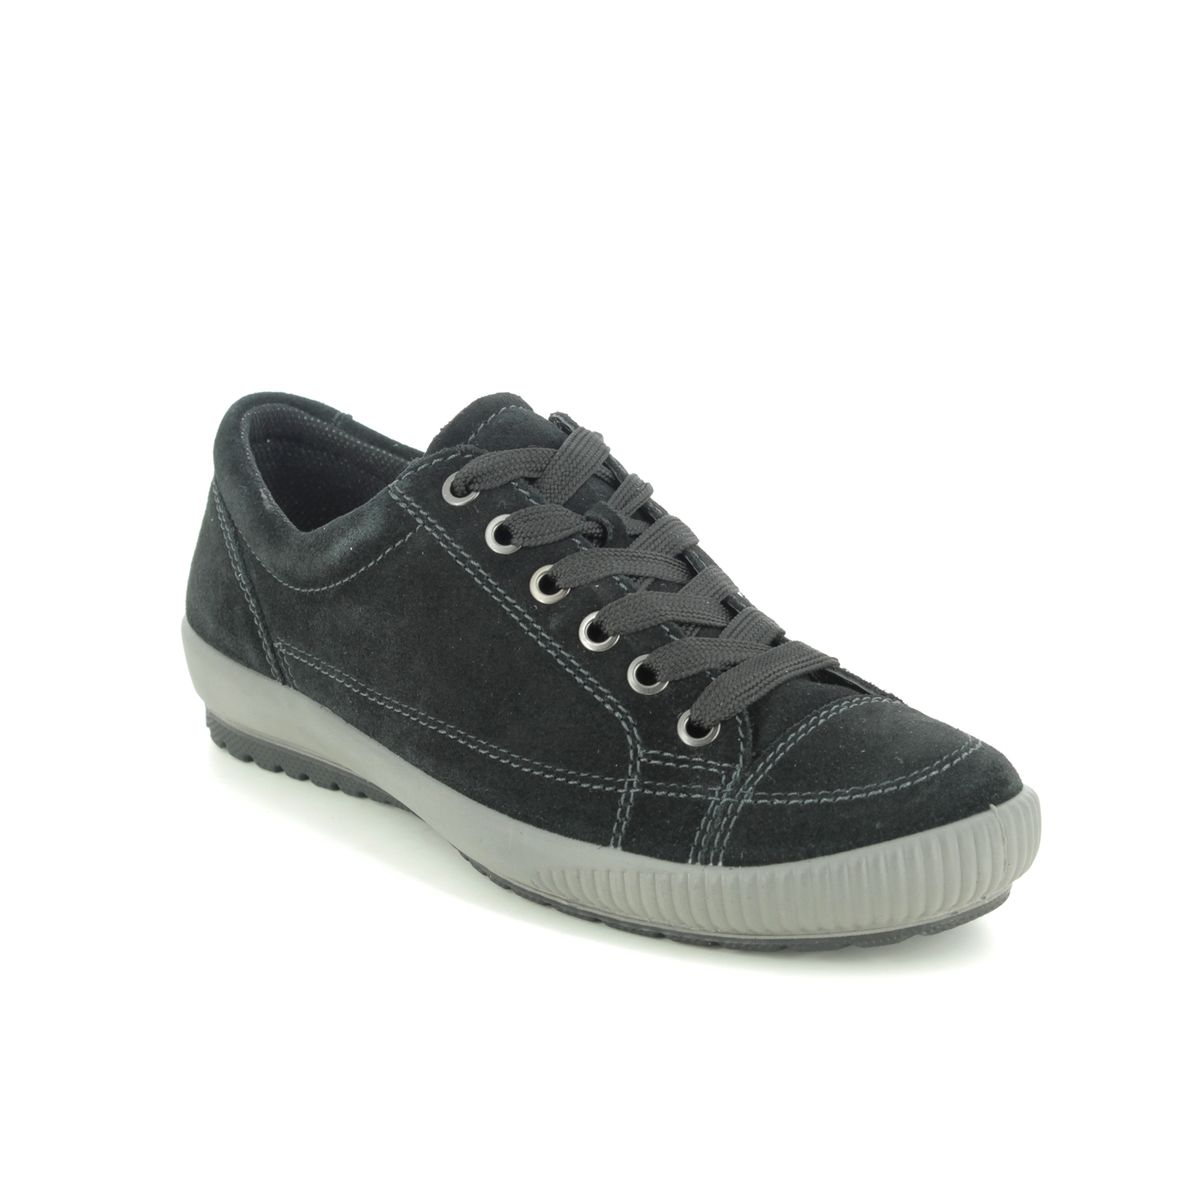 Legero Tanaro Stitch Black Suede Womens Lacing Shoes 0800820-0000 In Size 4.5 In Plain Black Suede